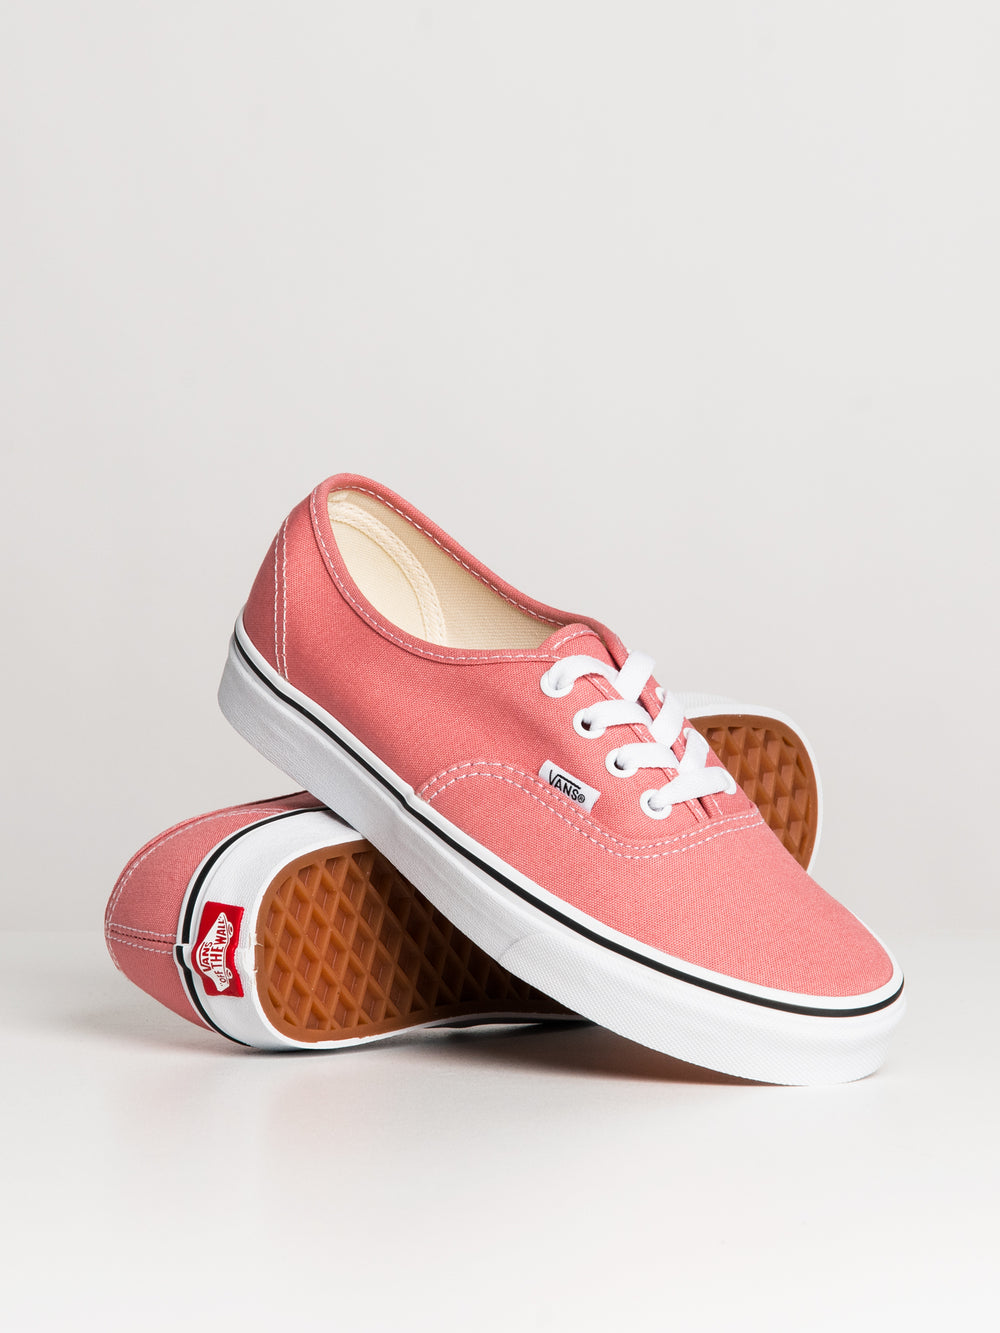 WOMENS VANS AUTHENTIC ROSETTE SNEAKER - CLEARANCE